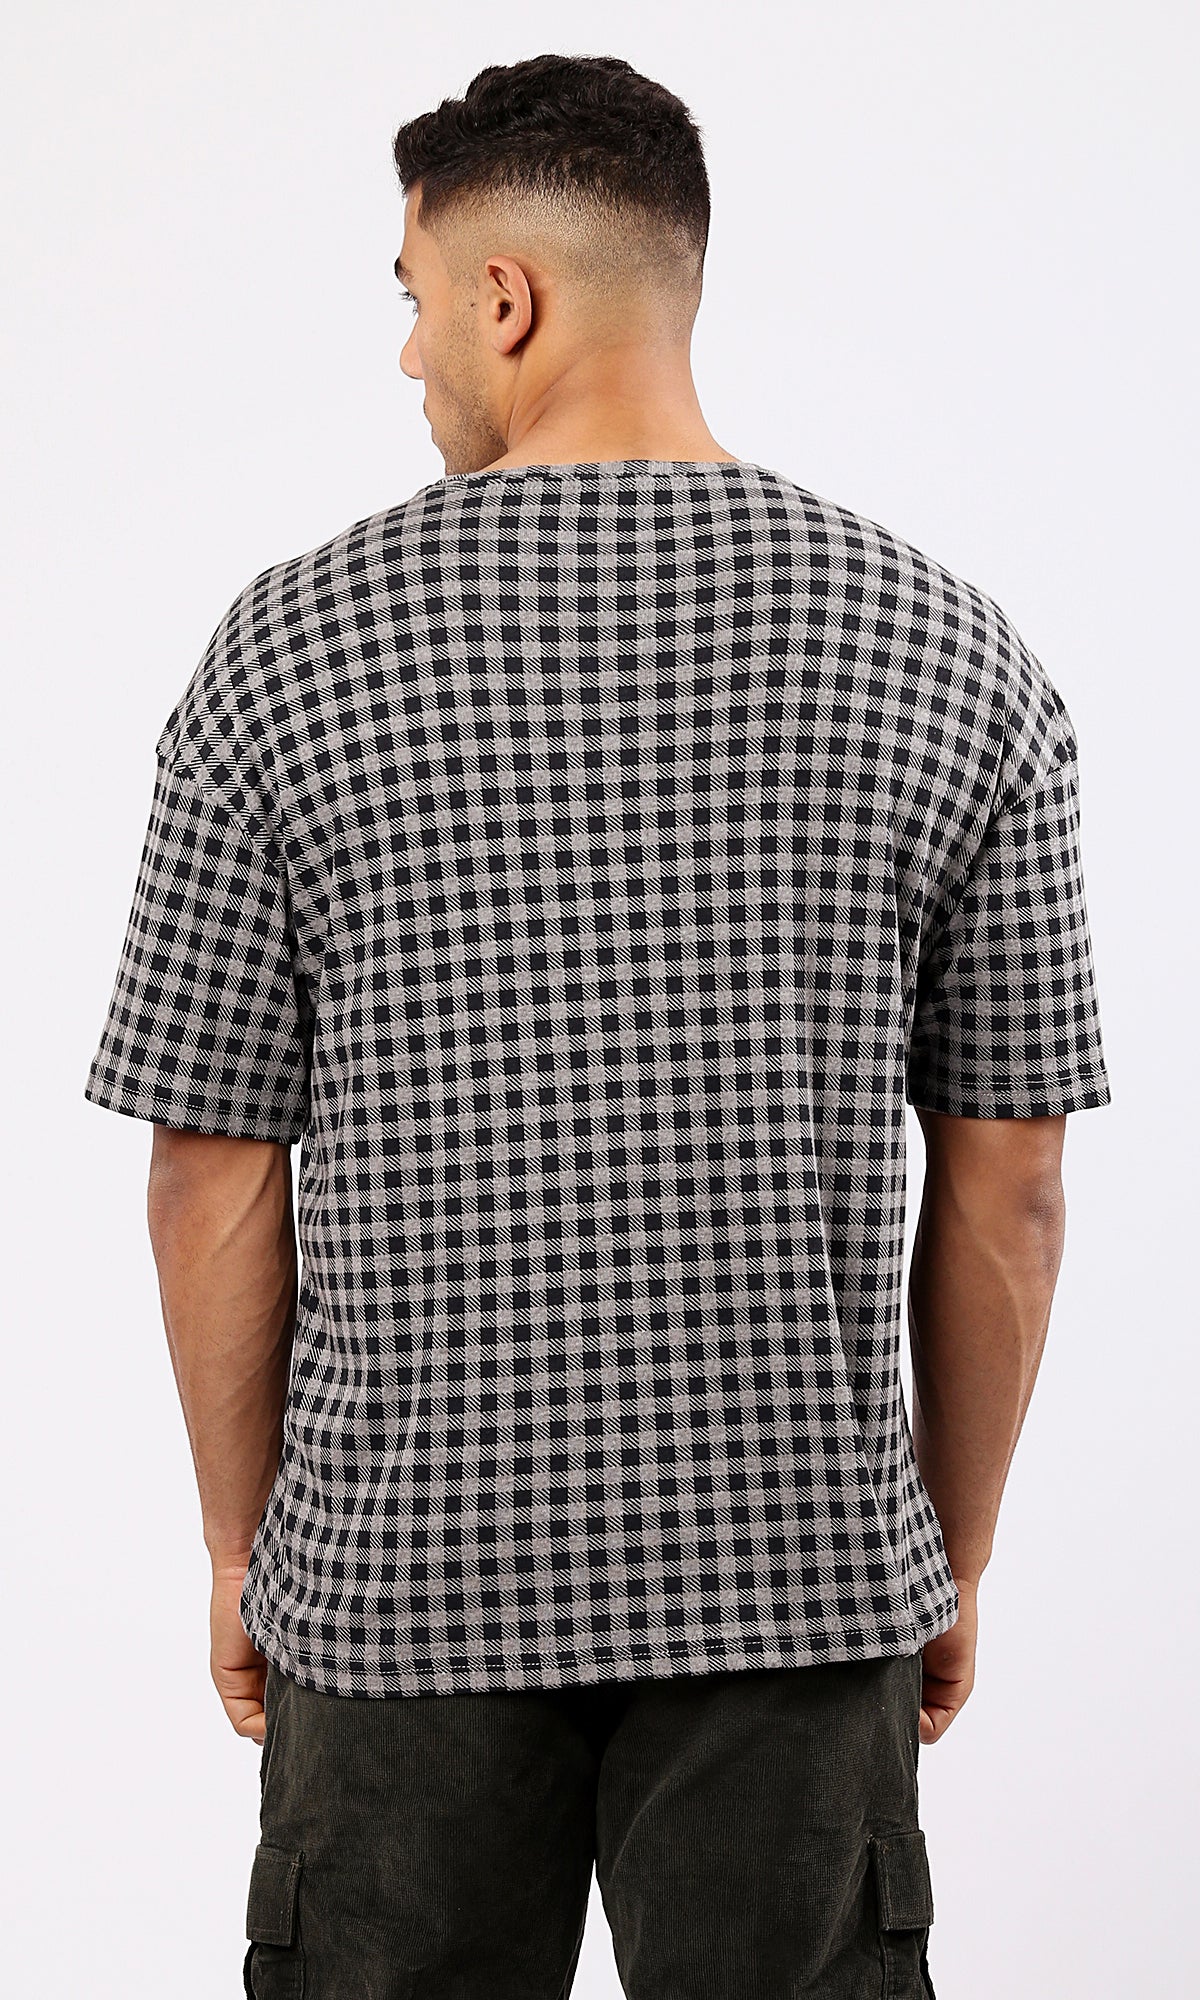 O182207 Grey & Black Plaids Relaxed Summer Tee